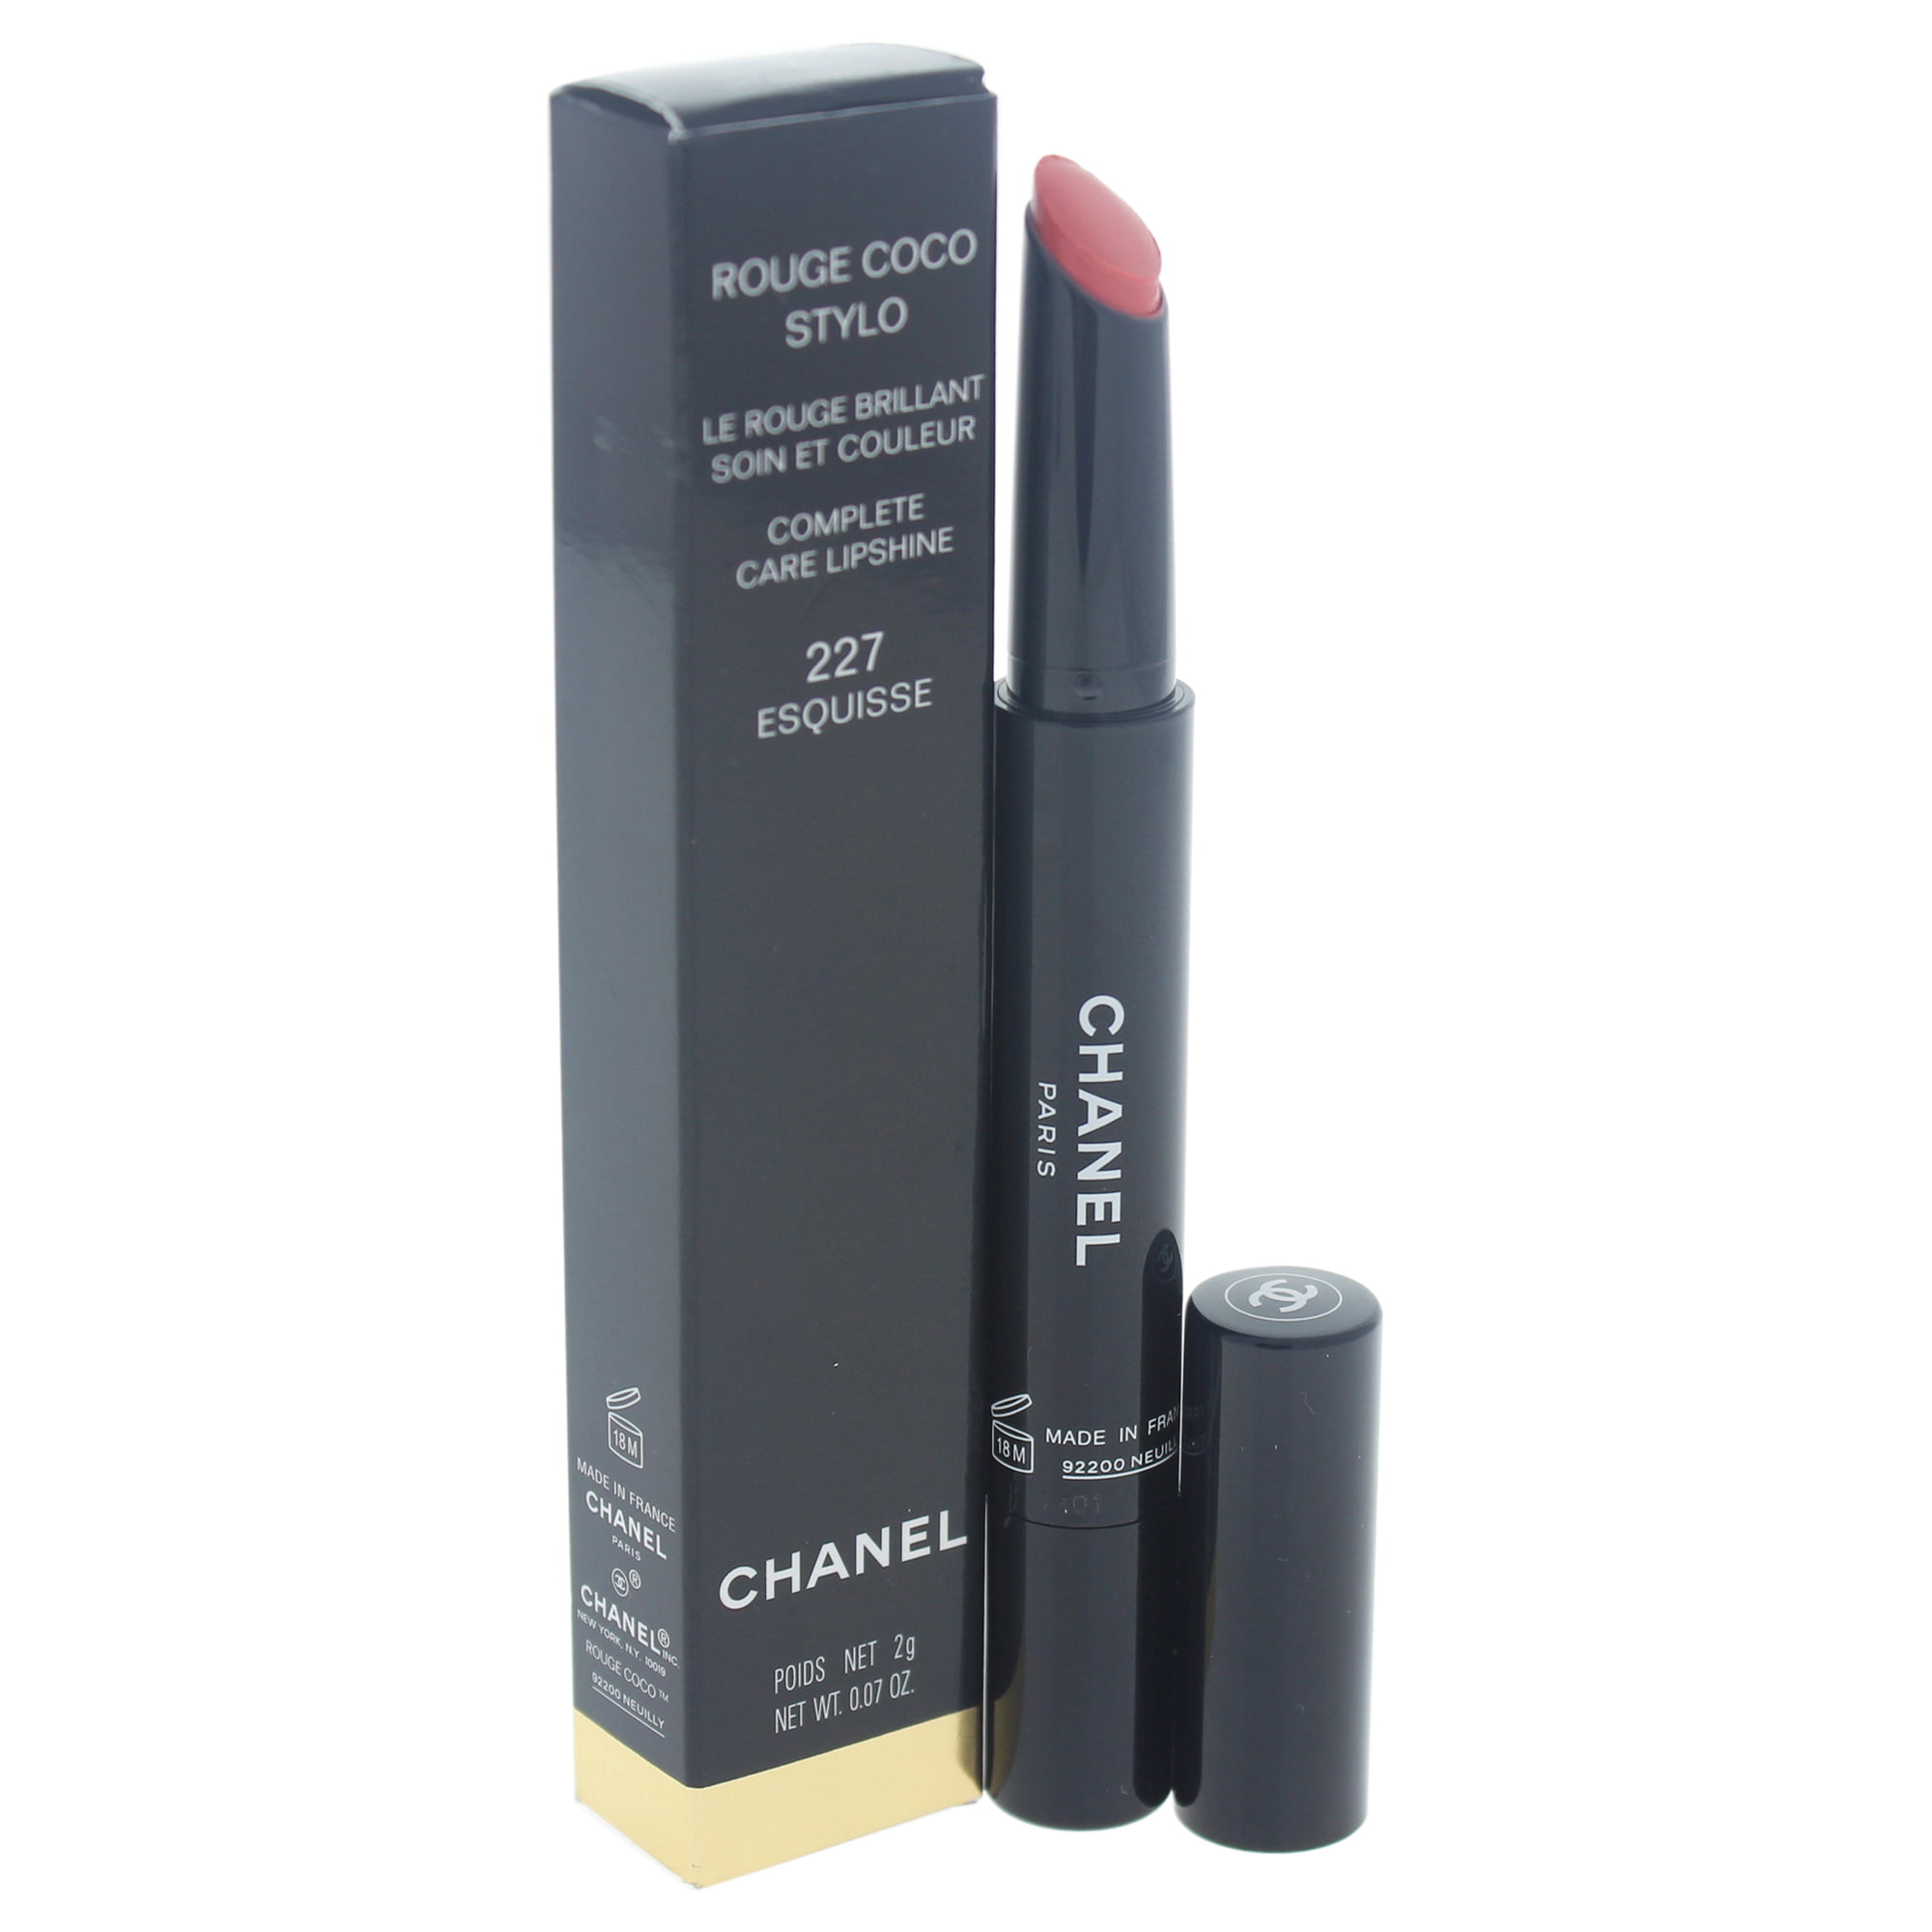 Rouge Coco Stylo Complete Care Lipshine - # 227 Esquisse by Chanel for  Women - 0.07 oz Lipstick